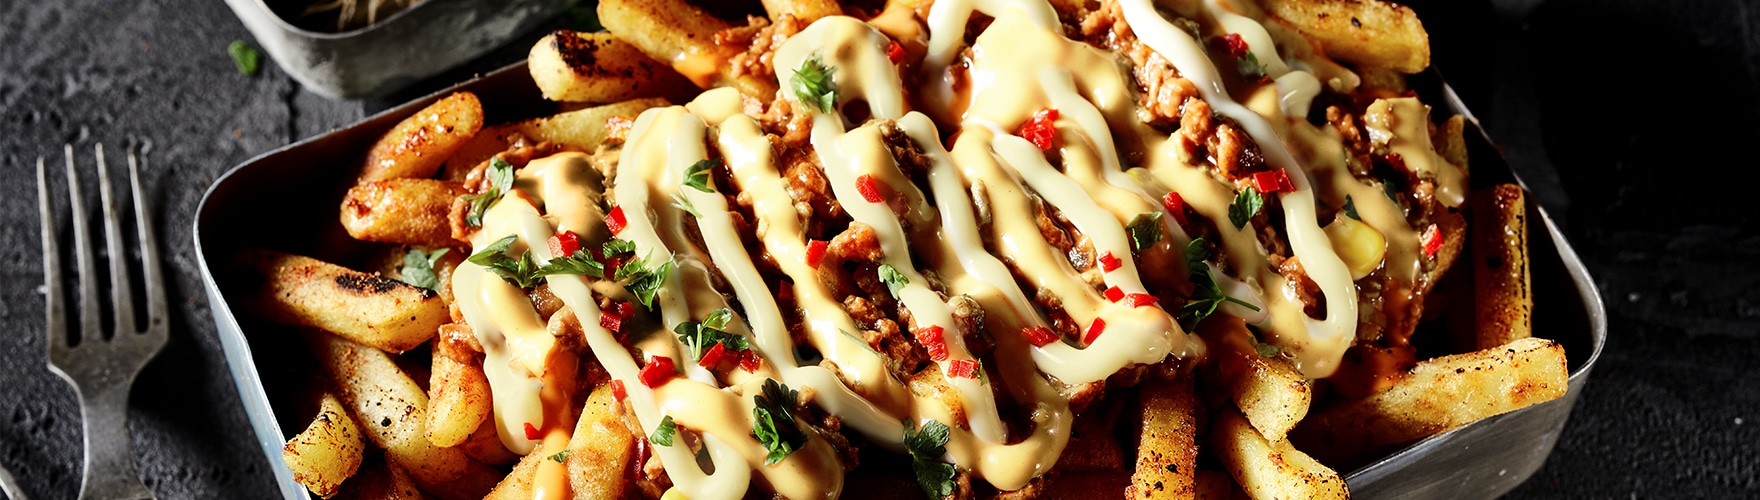 Loaded fries with minced meat and mature cheese